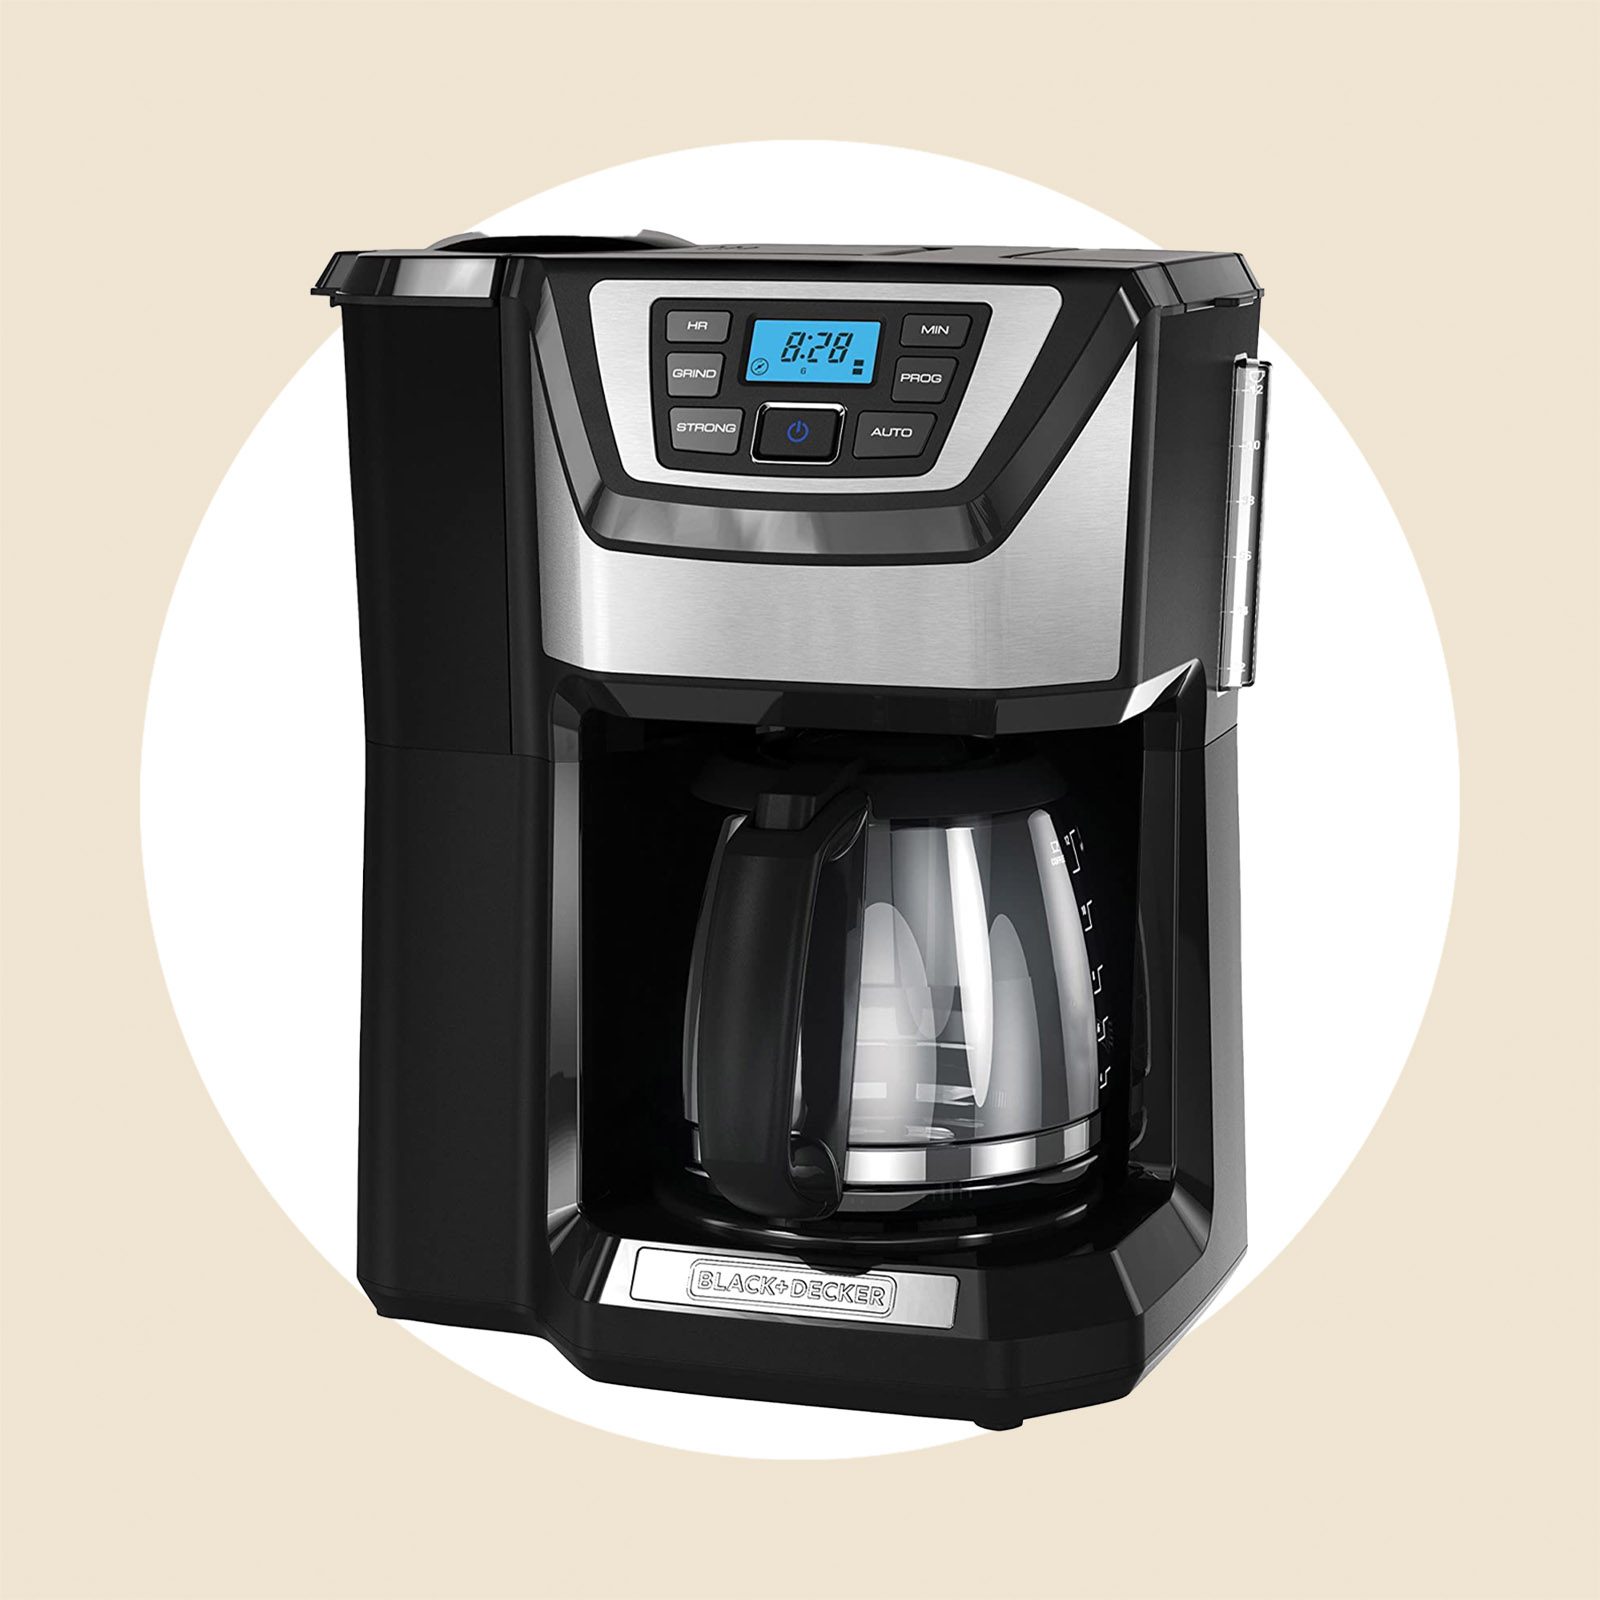 Black + Decker Mill and Brew Coffee Maker & Reviews